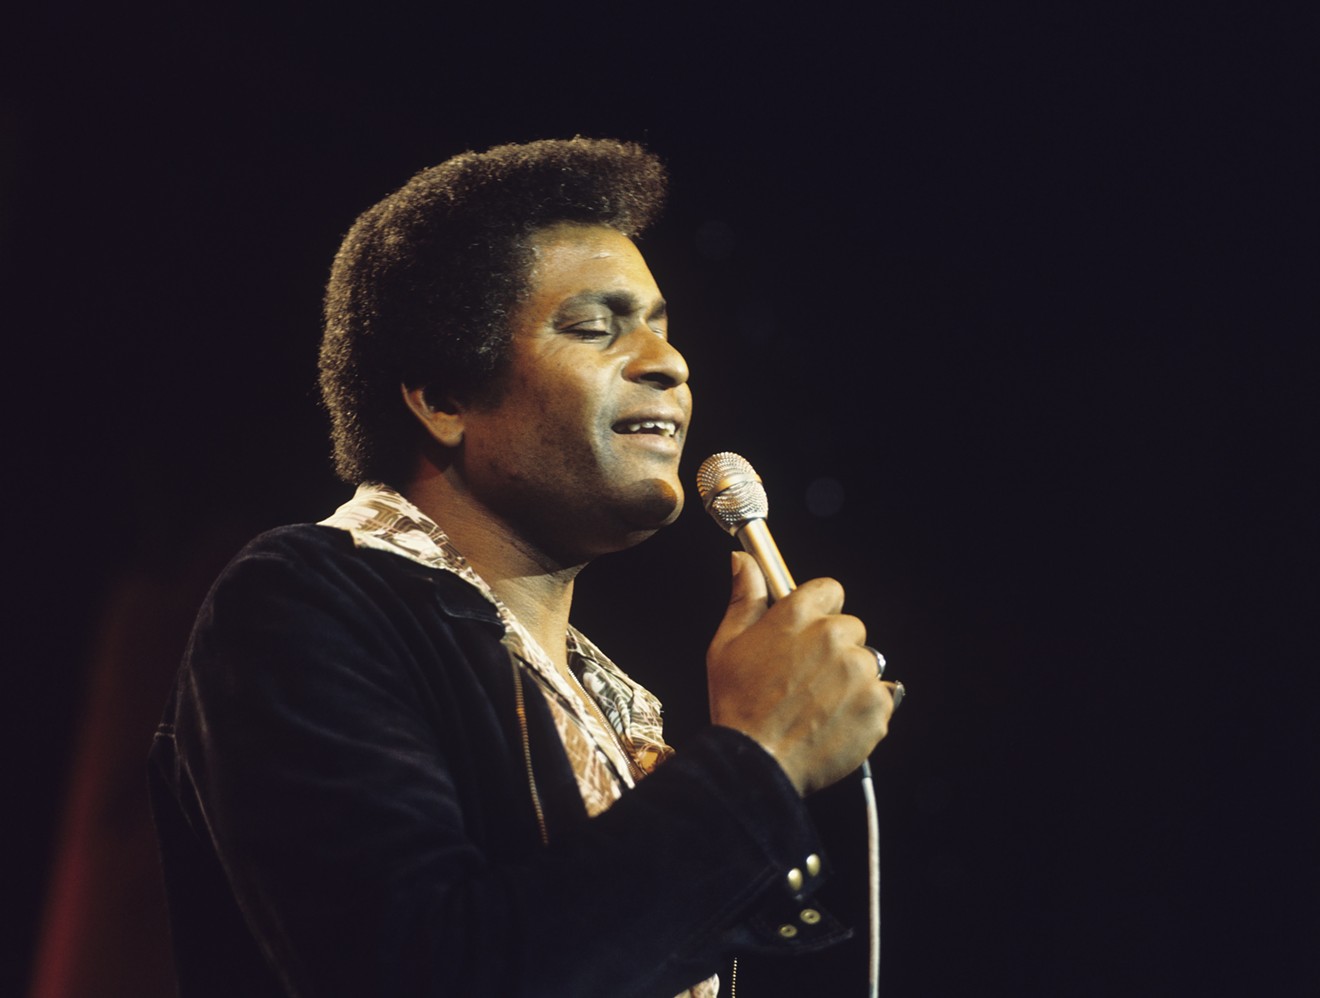 Mississippi-born country legend Charley Pride chose North Texas as his home. He made a whole country proud.